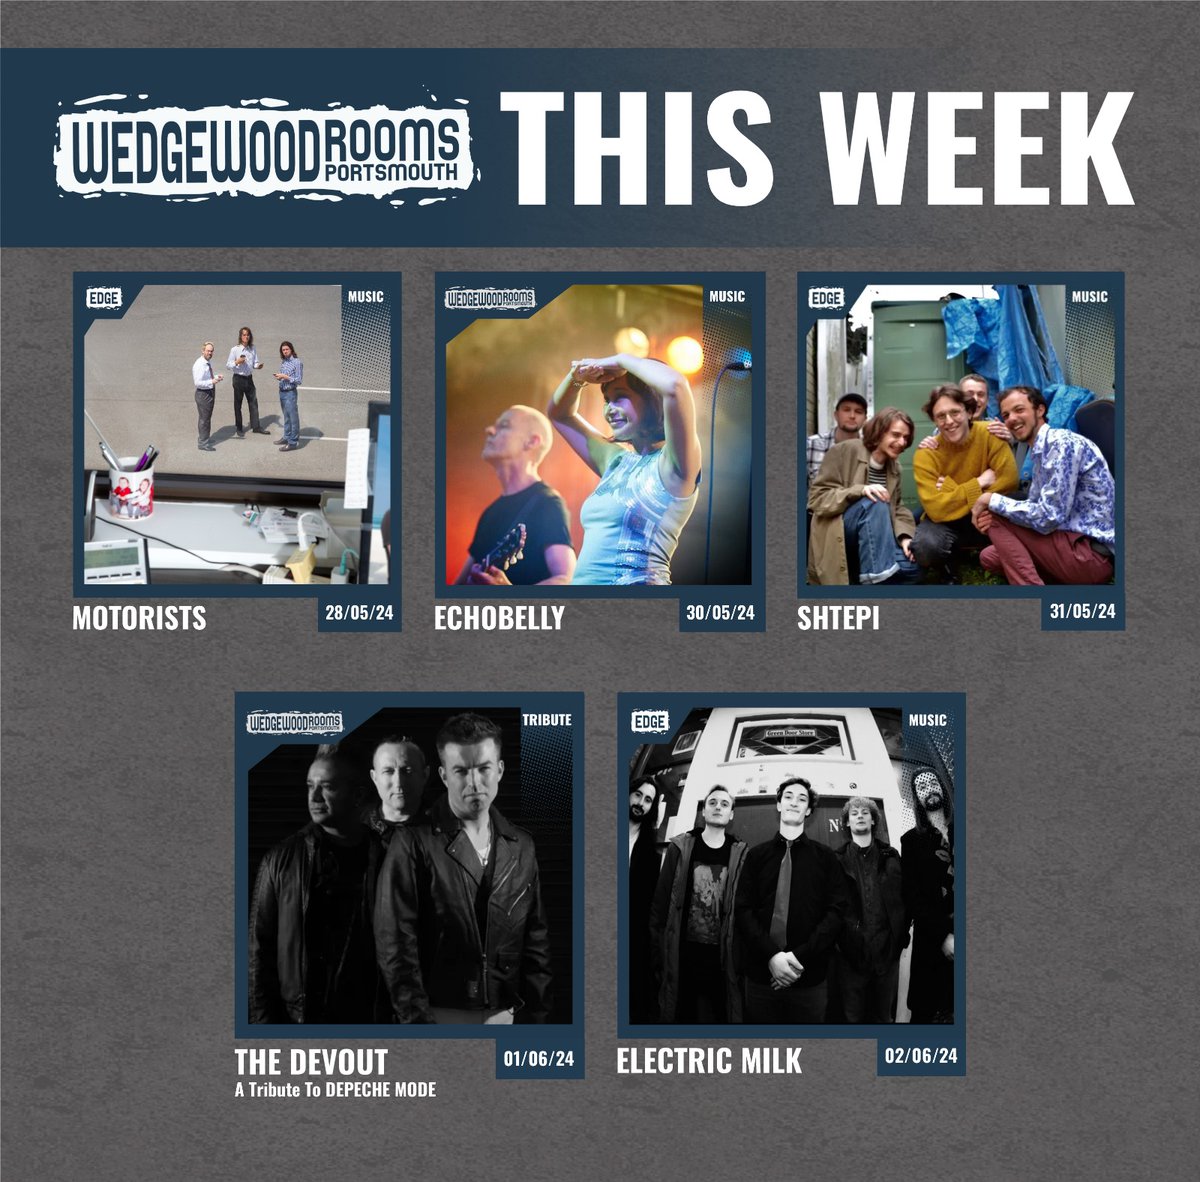 This week at the Wedge!😍 Motorists w/ Not So Clever + @WinterGardensUK @RealEchobelly w/ @KEELEYsound @Shtepimusic w/ @wonderbugband + The Pill The Devout w/ Love Asylum Electric Milk w/ @Sadcult_Band + Stompbox 👉 wedgewood-rooms.co.uk 👈